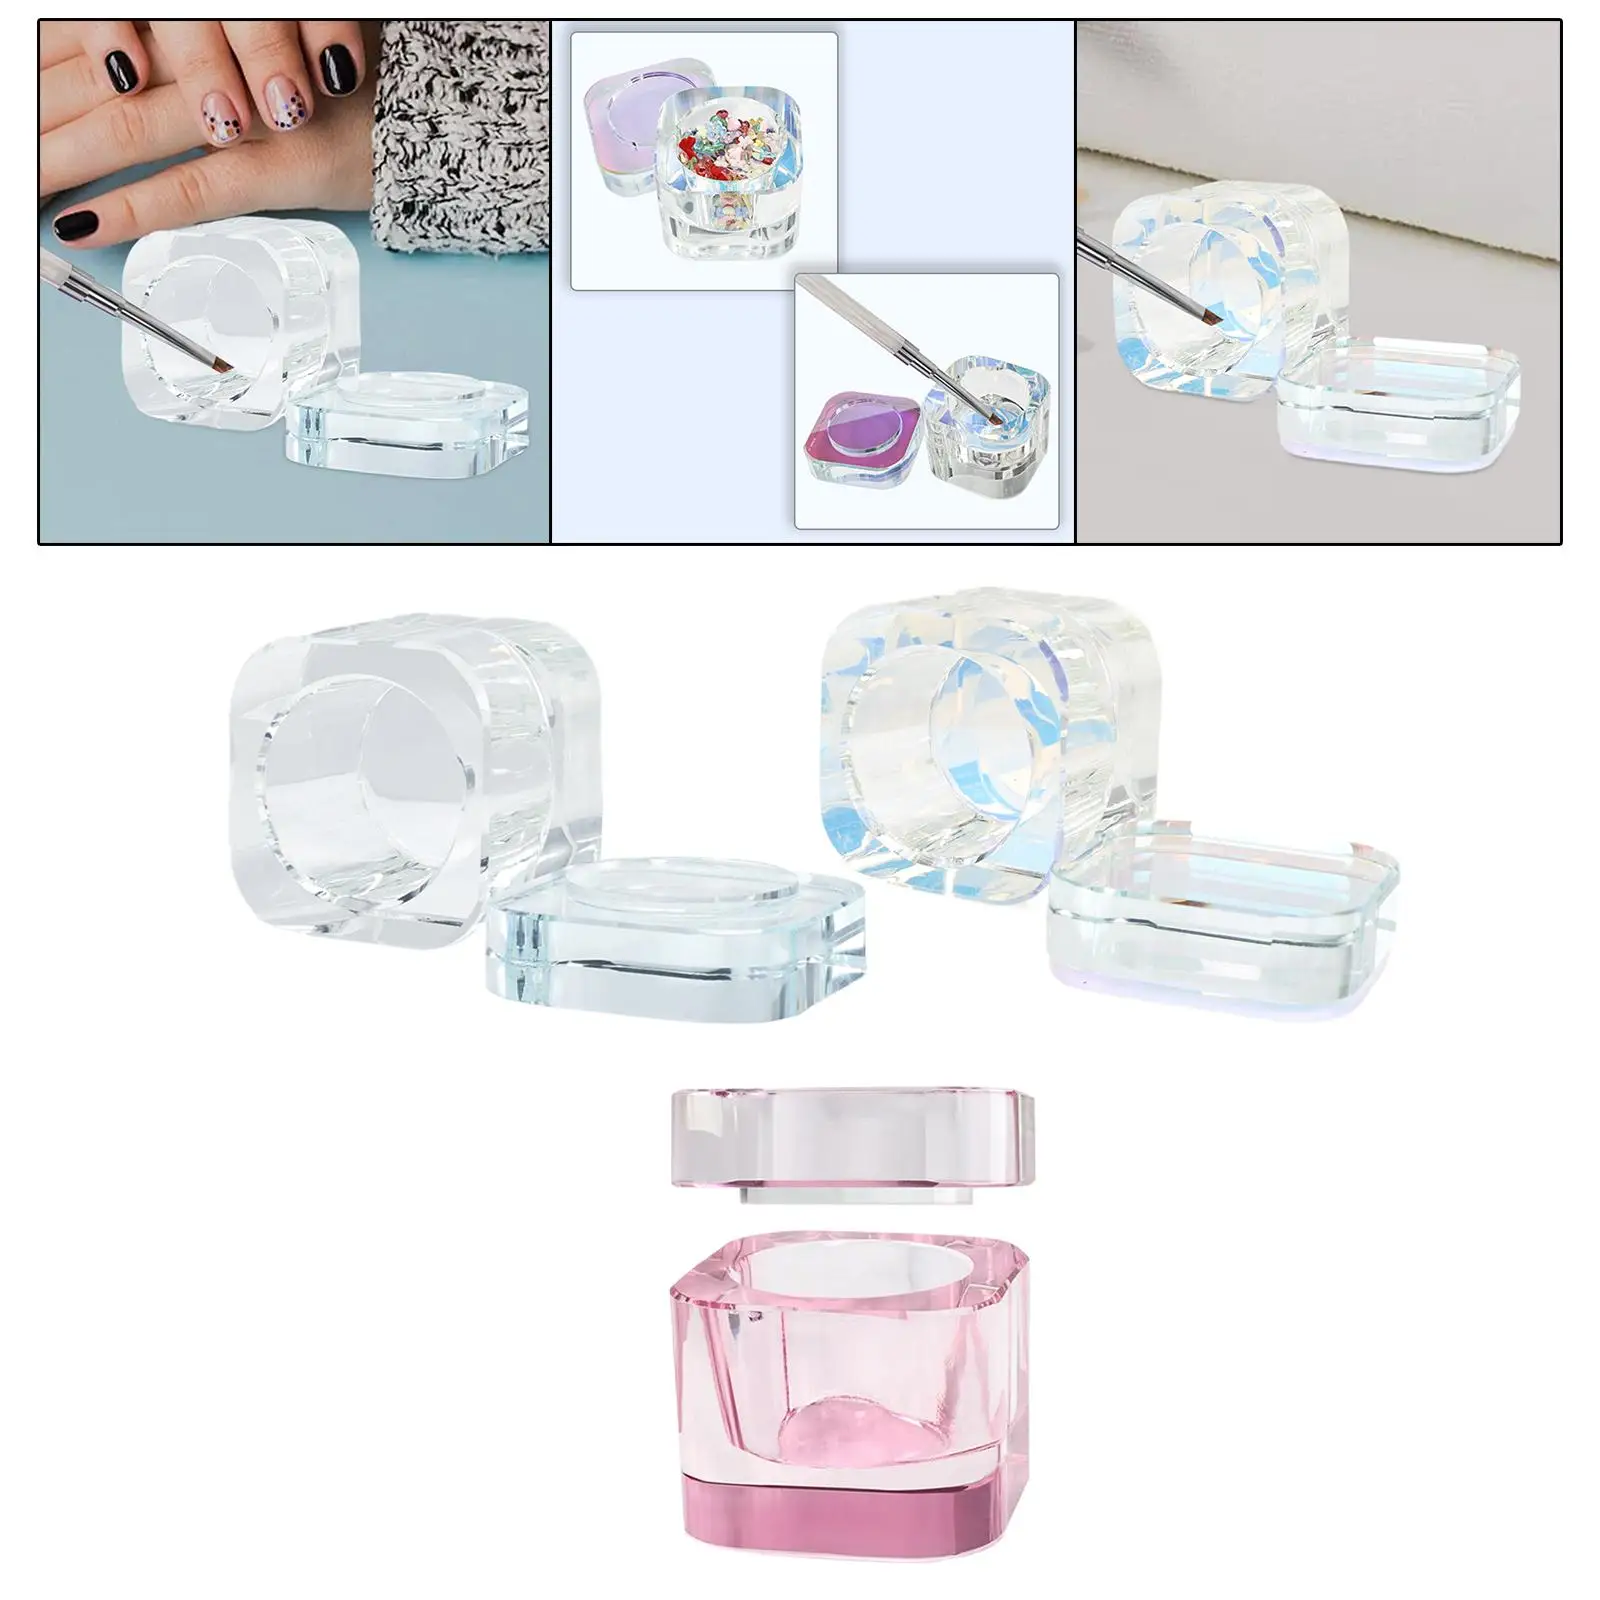 Nail Art Liquid Dappen Dish with Lid Nails Liquid Powder Containers Acrylic Nail Art Accessory Bowl Cup Holder for Salon Home